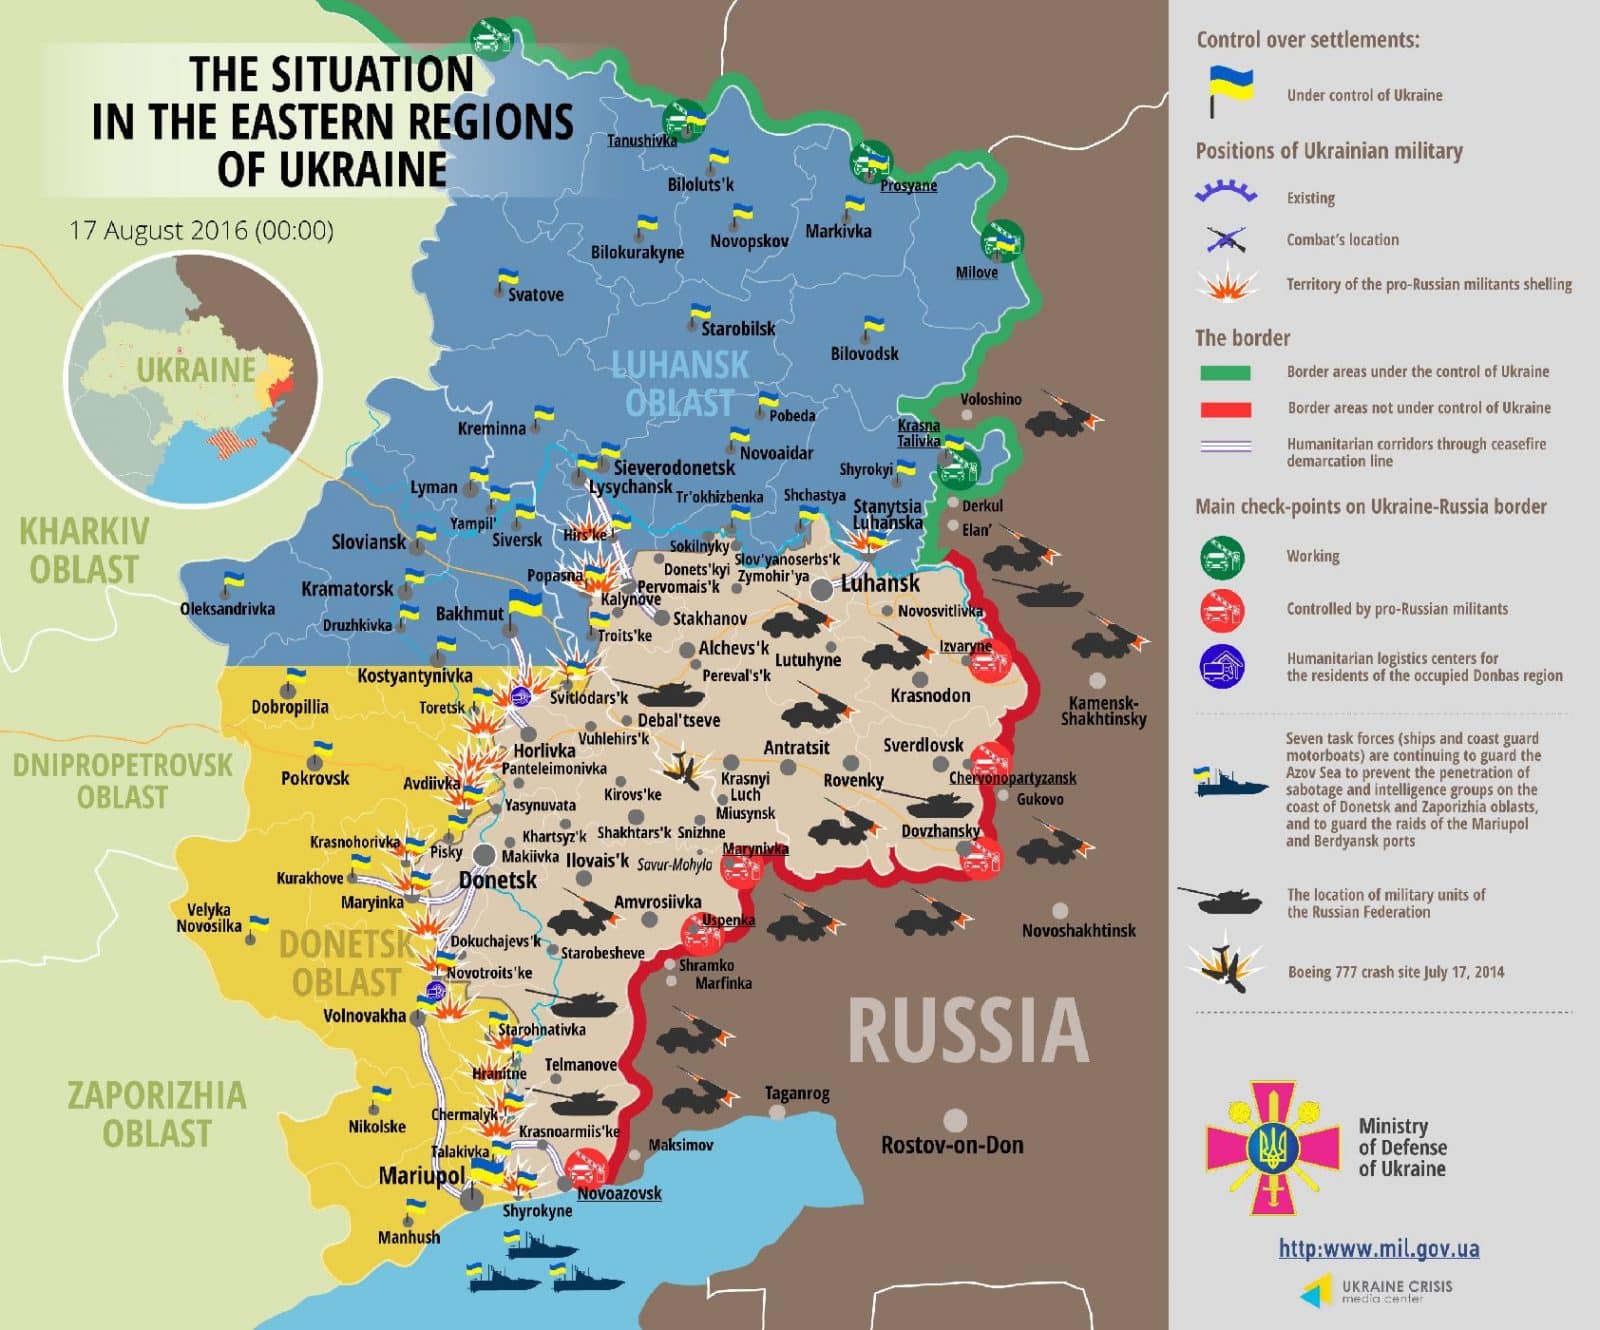 Russian troops attack Ukraine 96 times in last day amid escalation